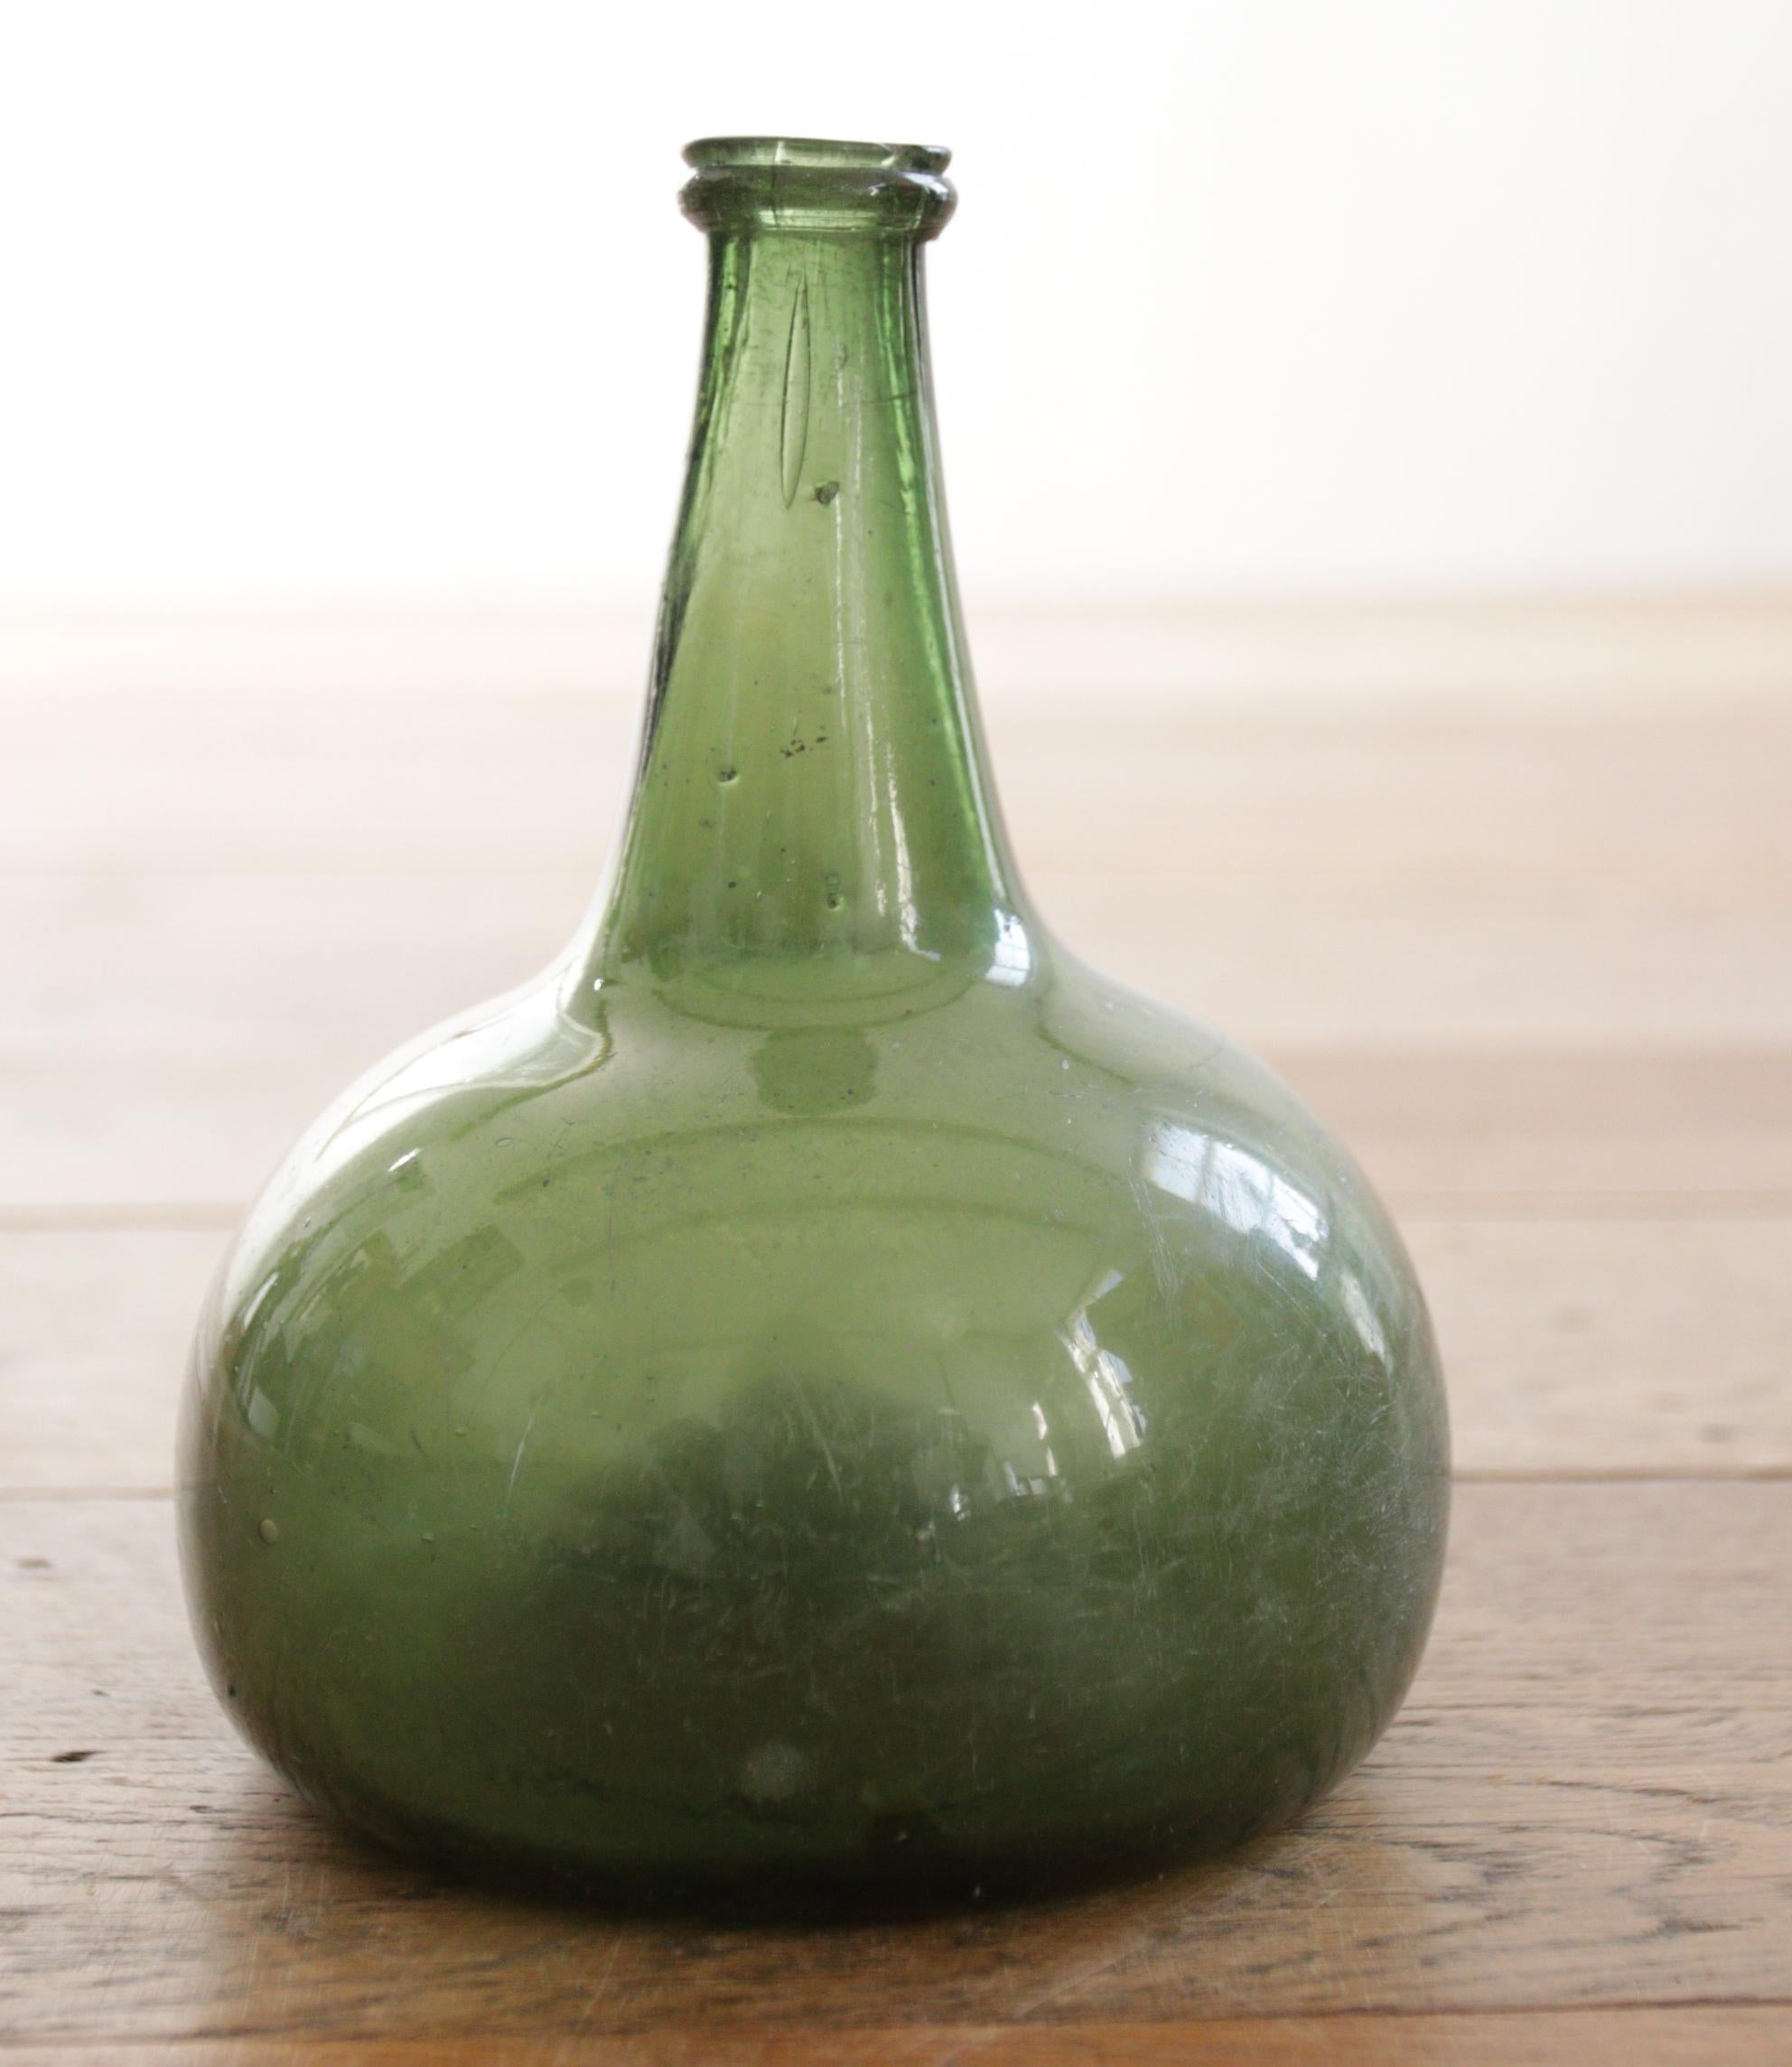 onion bottle from the 1700s